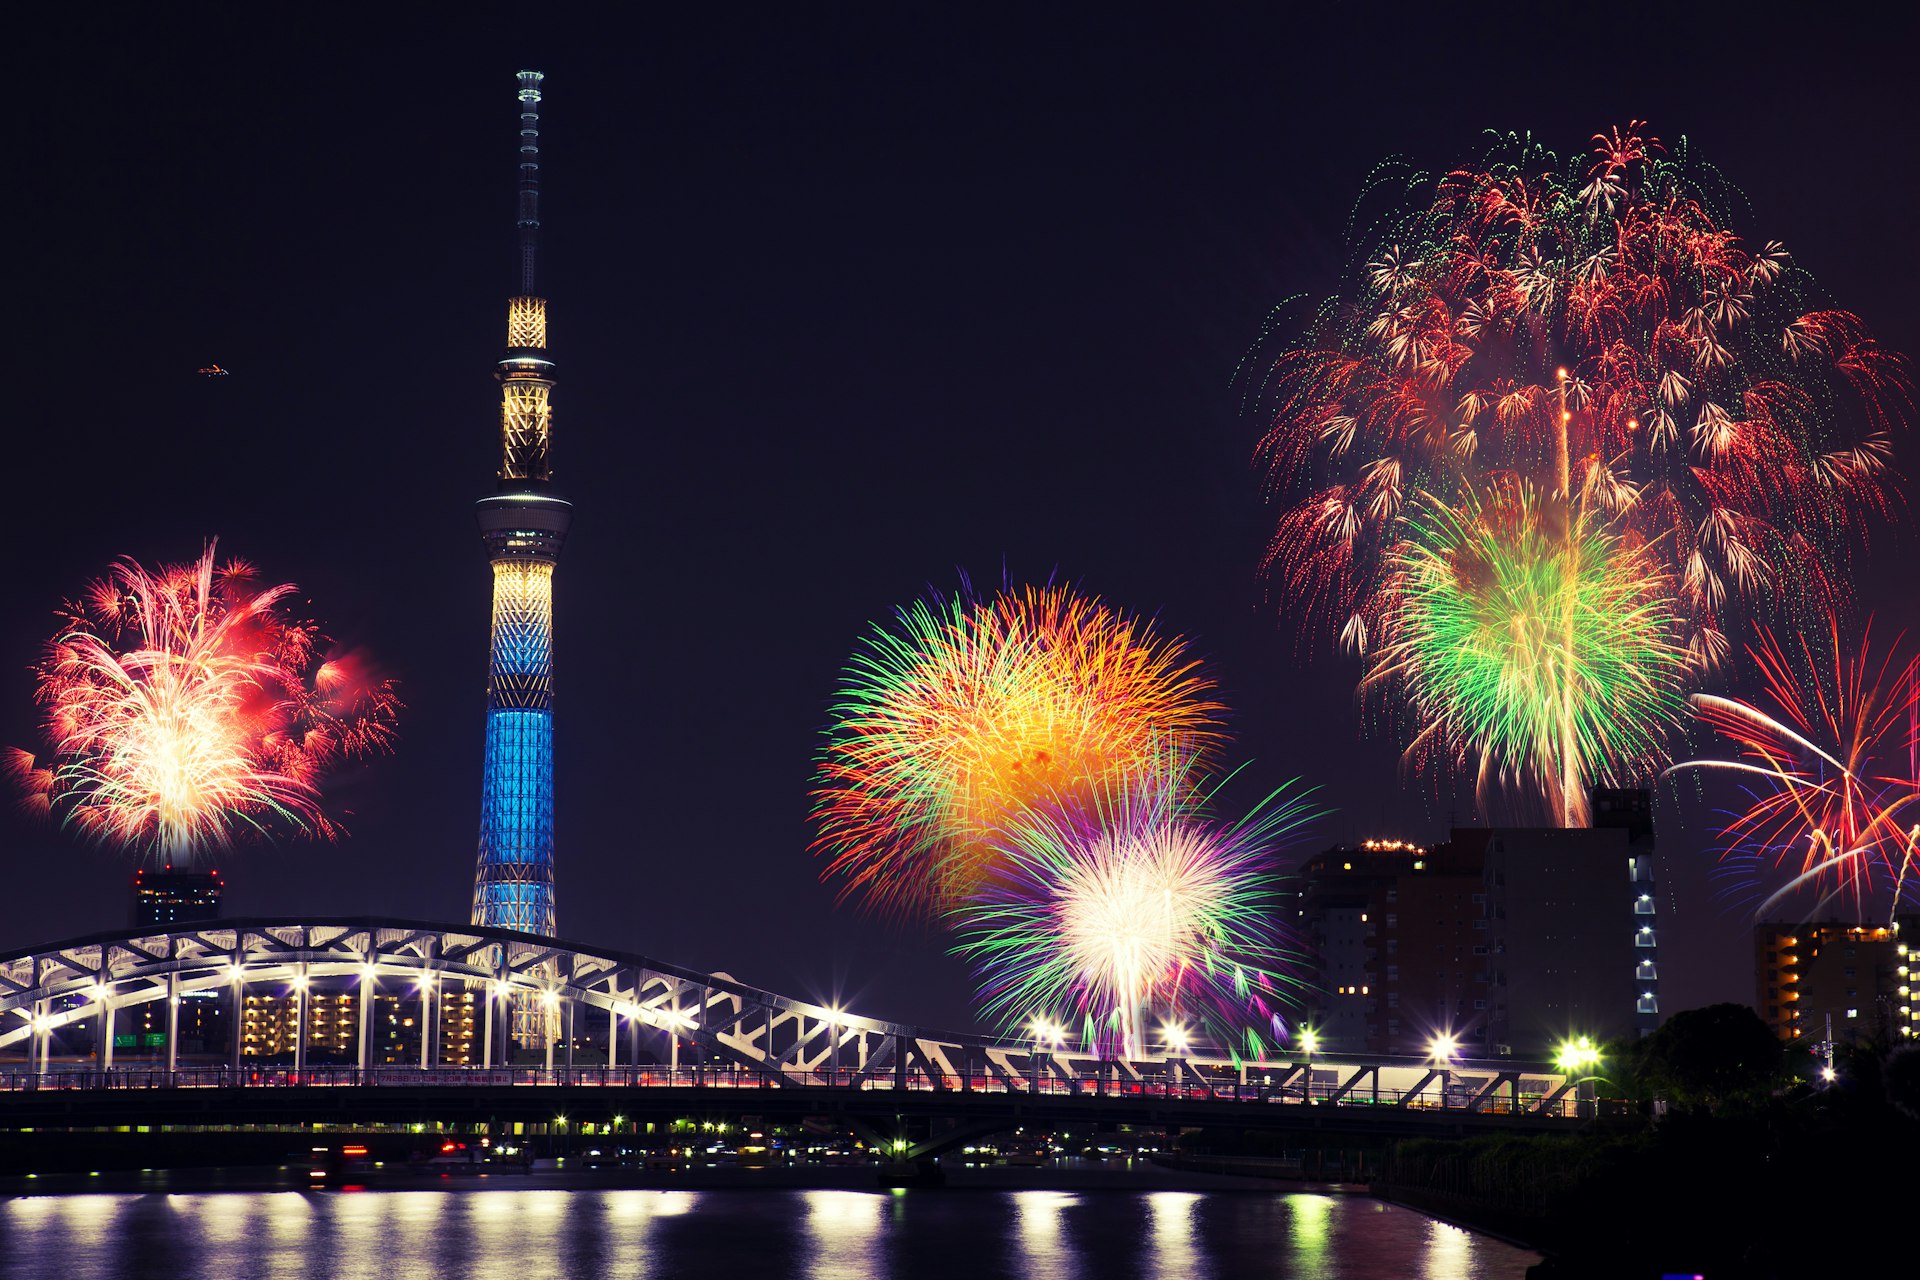 Summer Firework display over the Sumida River in Tokyo. Colourful explosions fill the night sky, below which a handful of skyscrapers are visible.